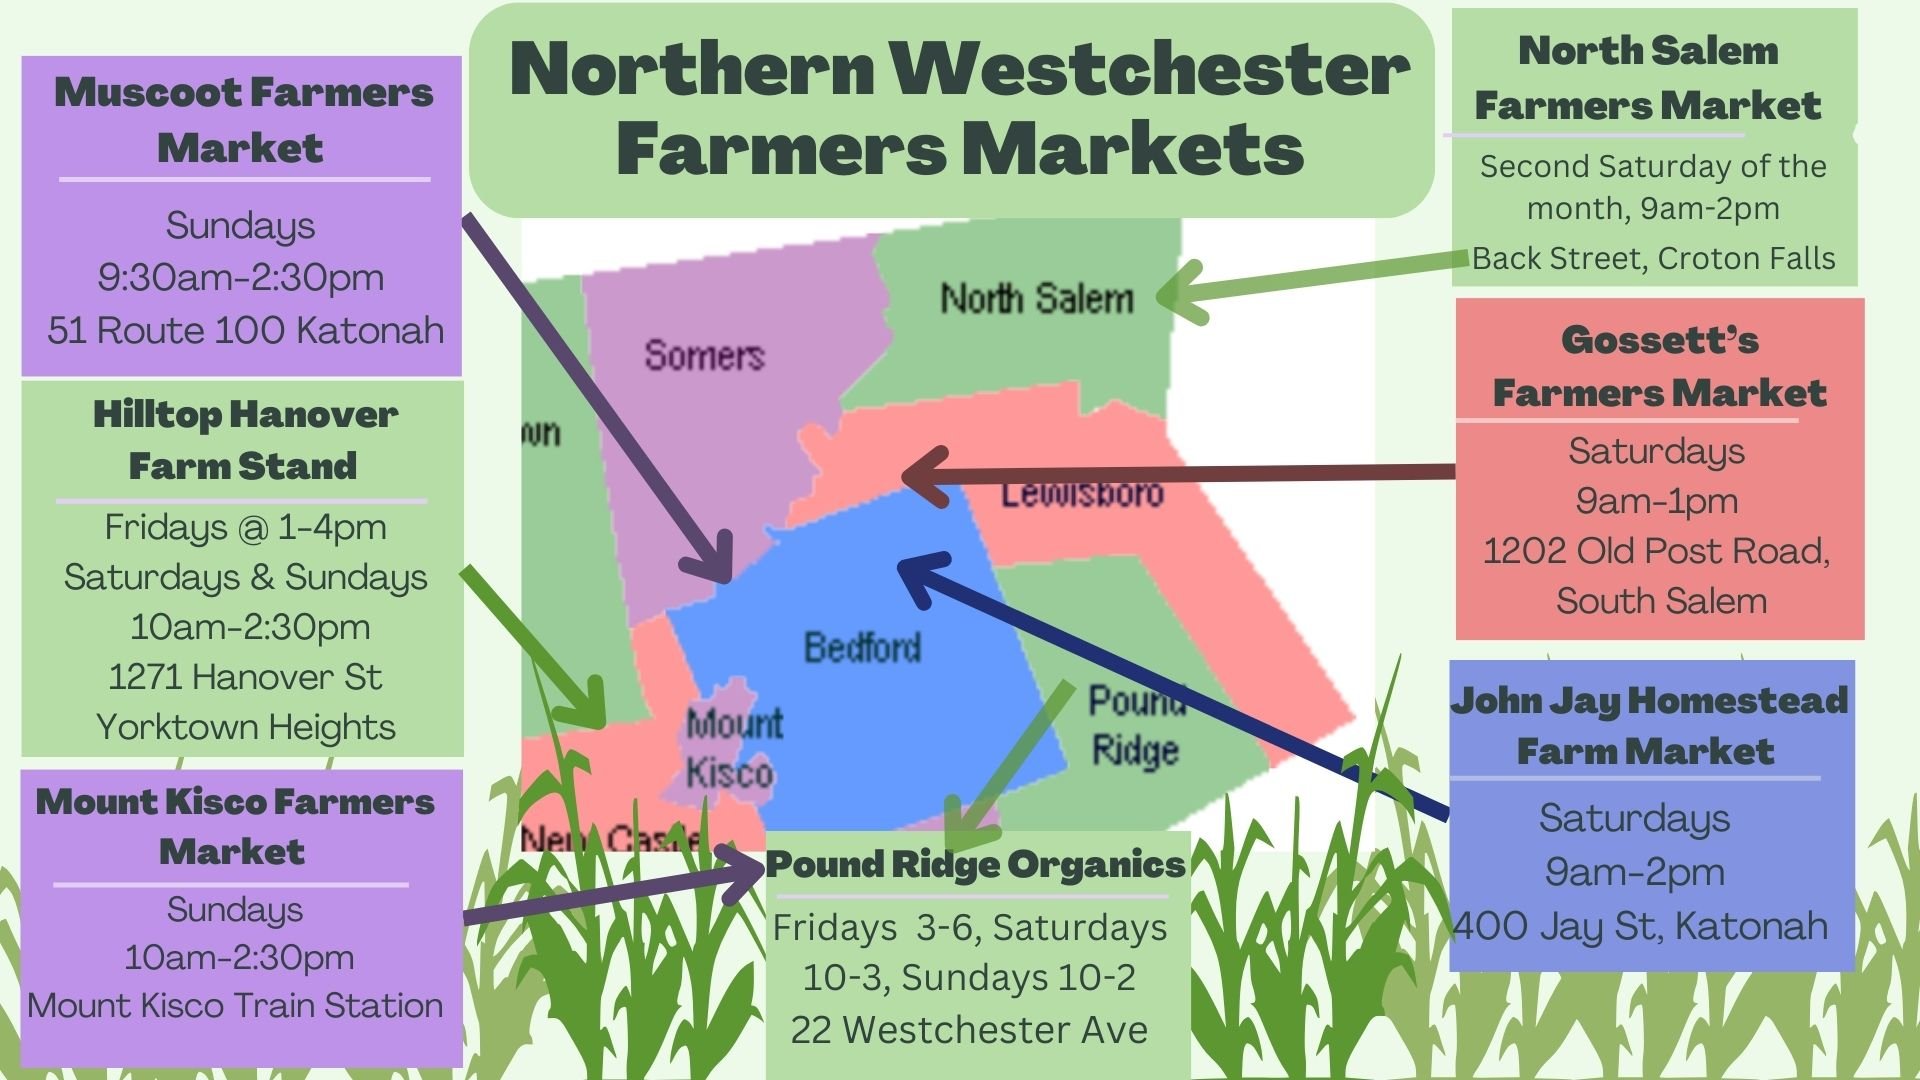 It's wonderful to have so many green markets nearby! I am looking forward to attending opening day at Muscoot this weekend. (Added bonus, the annual the Mothers Day sheep shearing festival is also Sunday!) Mount Kisco&rsquo;s market doesn&rsquo;t ope